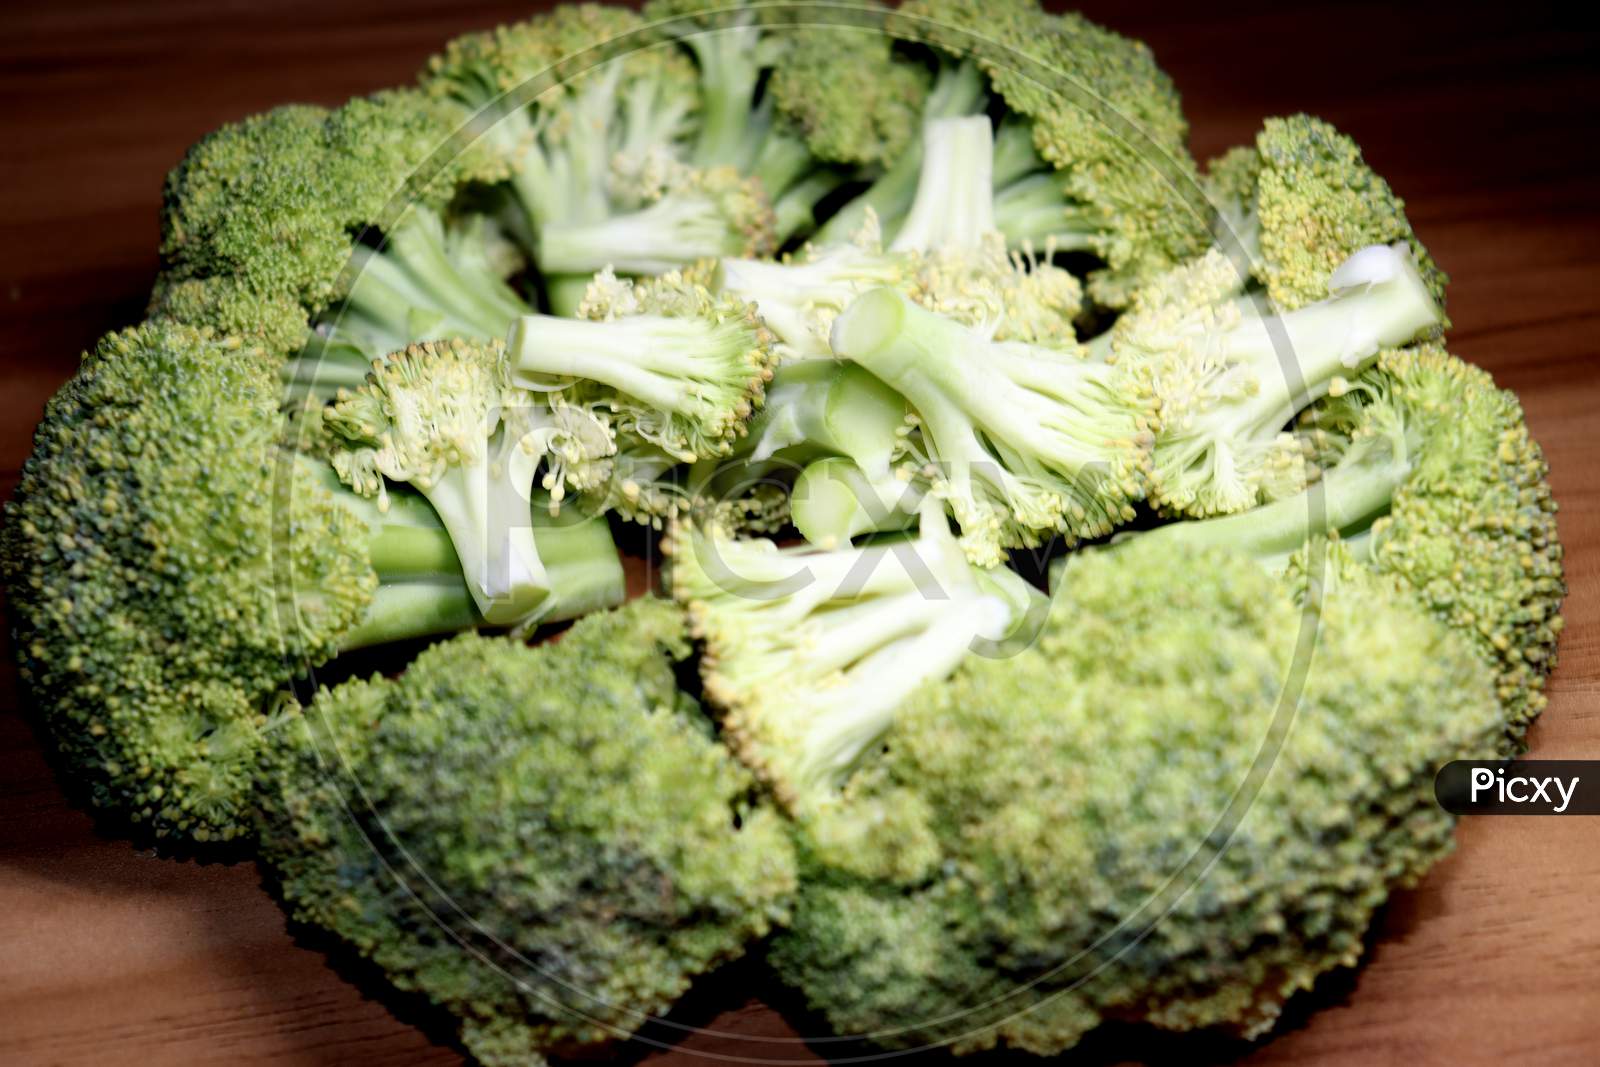 Sliced Broccoli Stock On Wooden Table